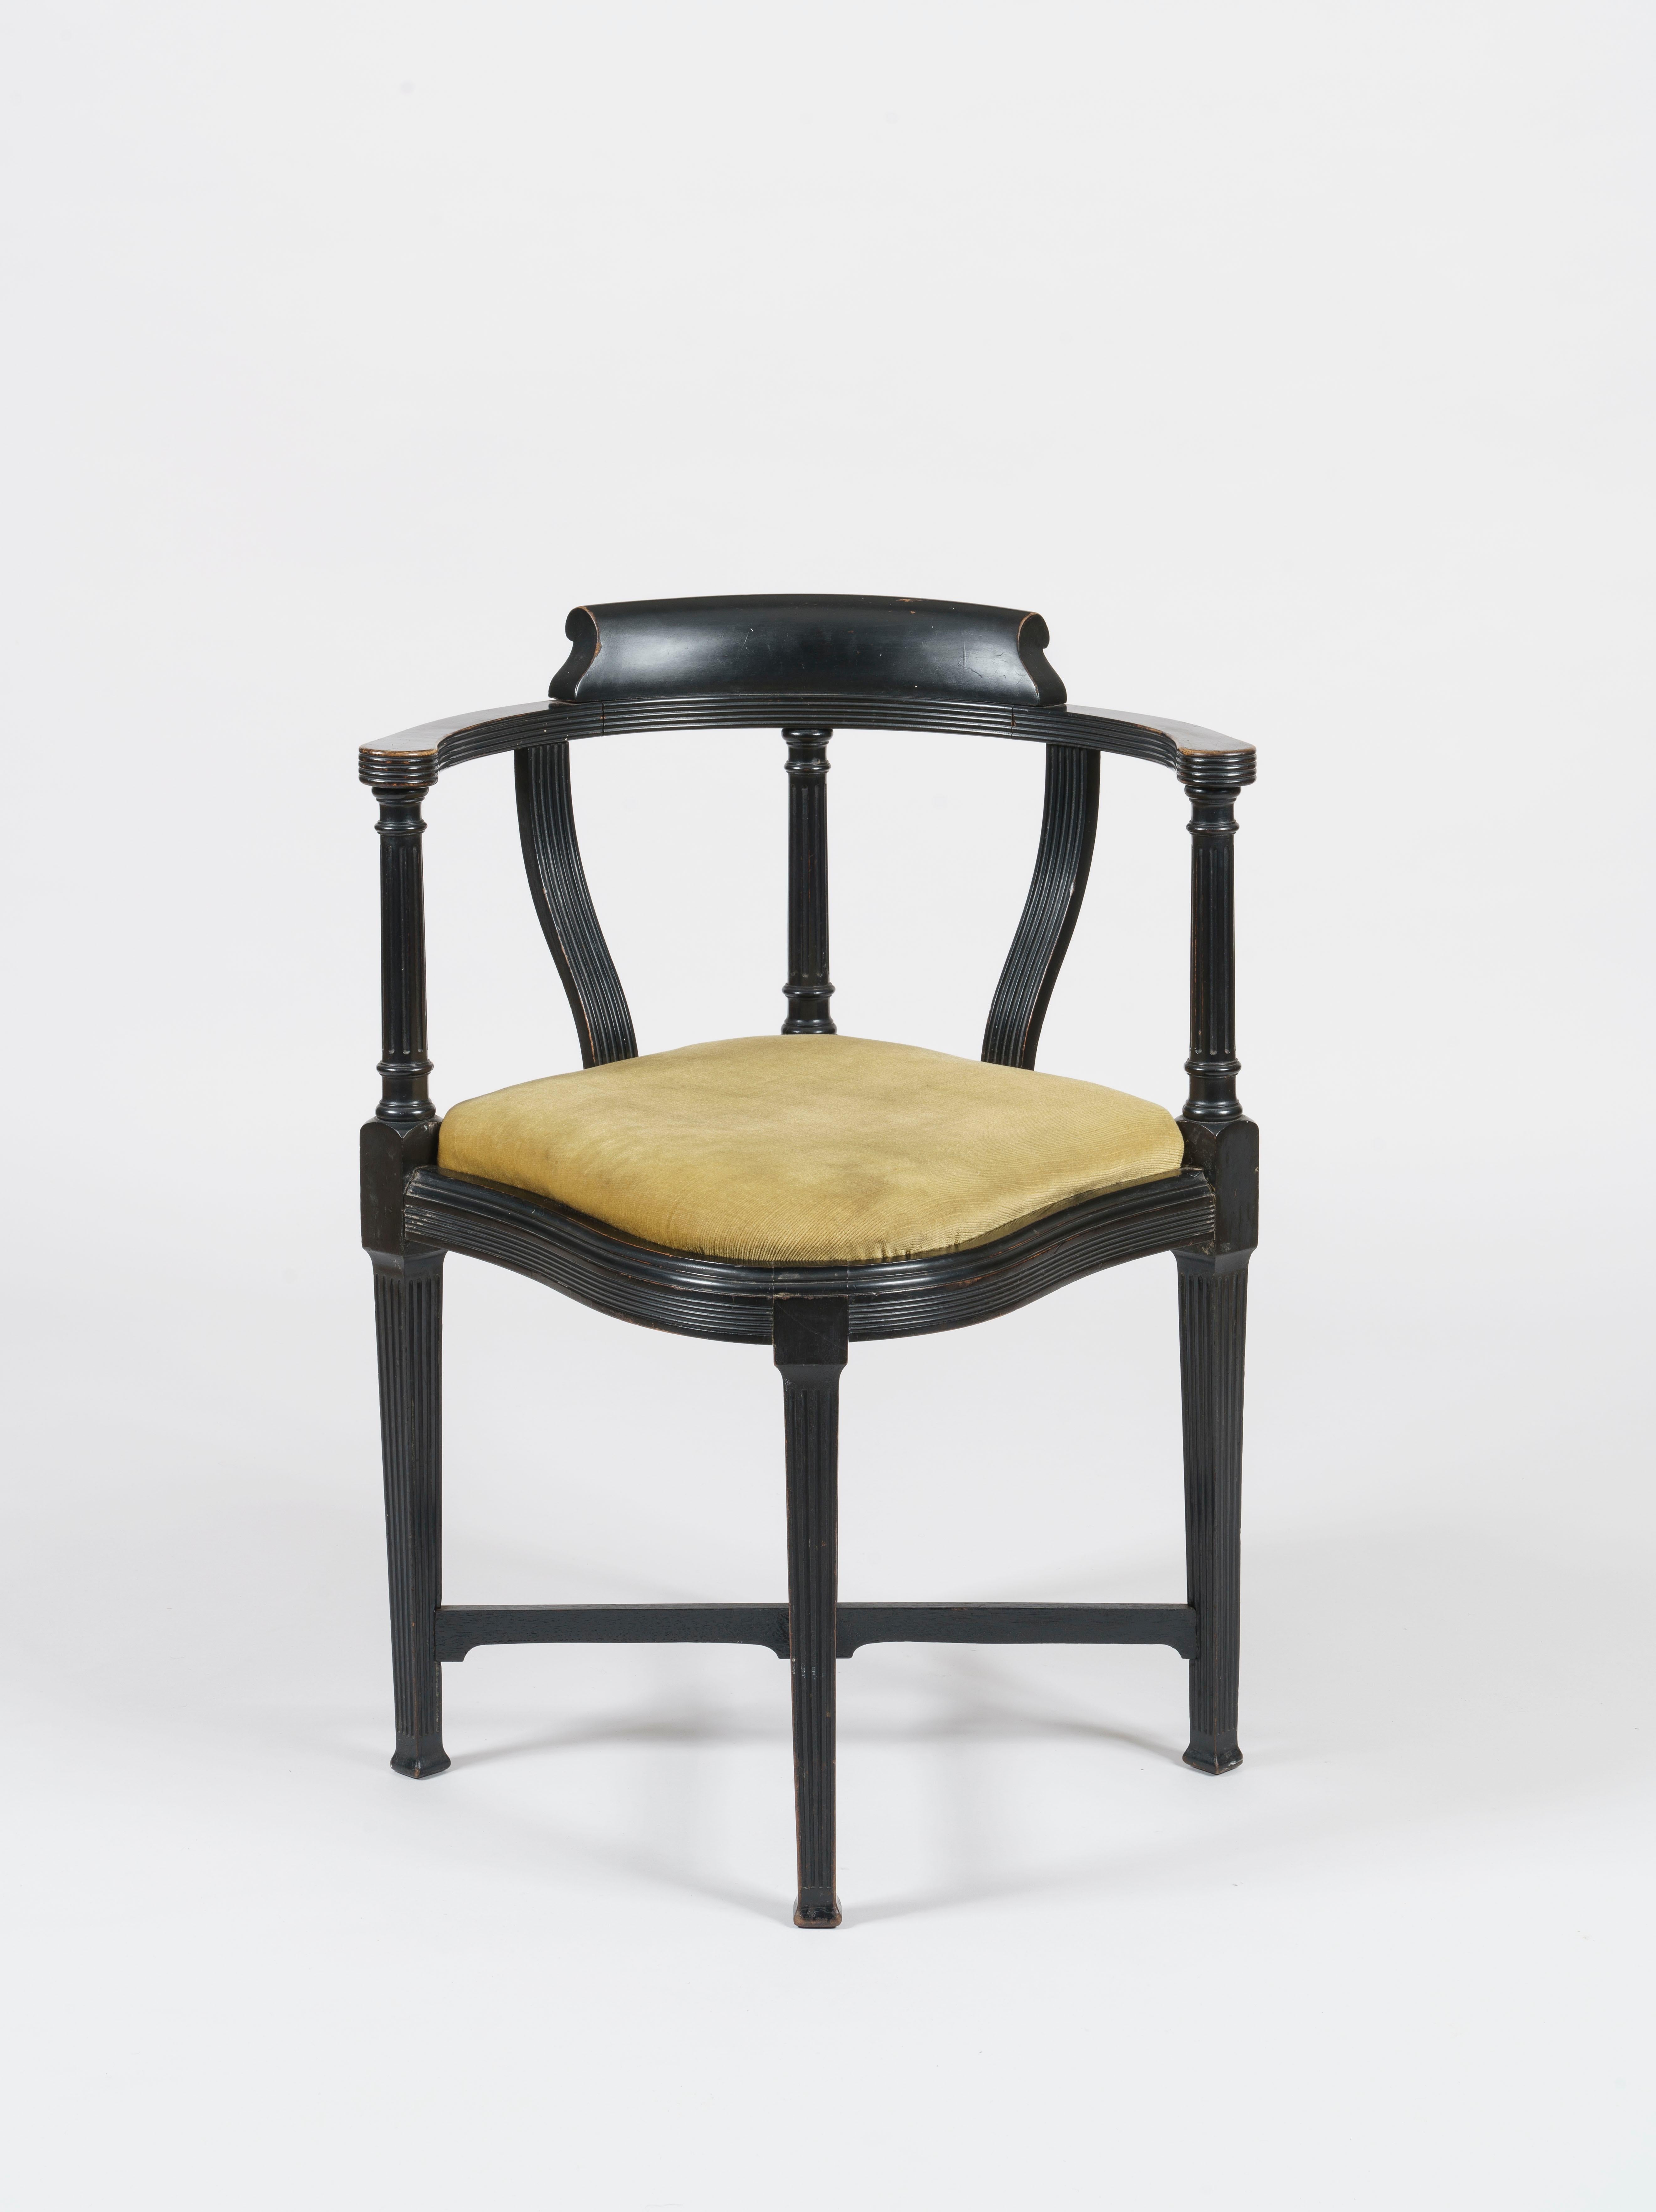 An aesthetic movement chair
By Lamb of Manchester

designed by W.J. Estall

Of unique elegance and design, the black ebonised chair fashioned in the Aesthetic manner featuring carved details along the seat rail, crest rail, and the refined upright